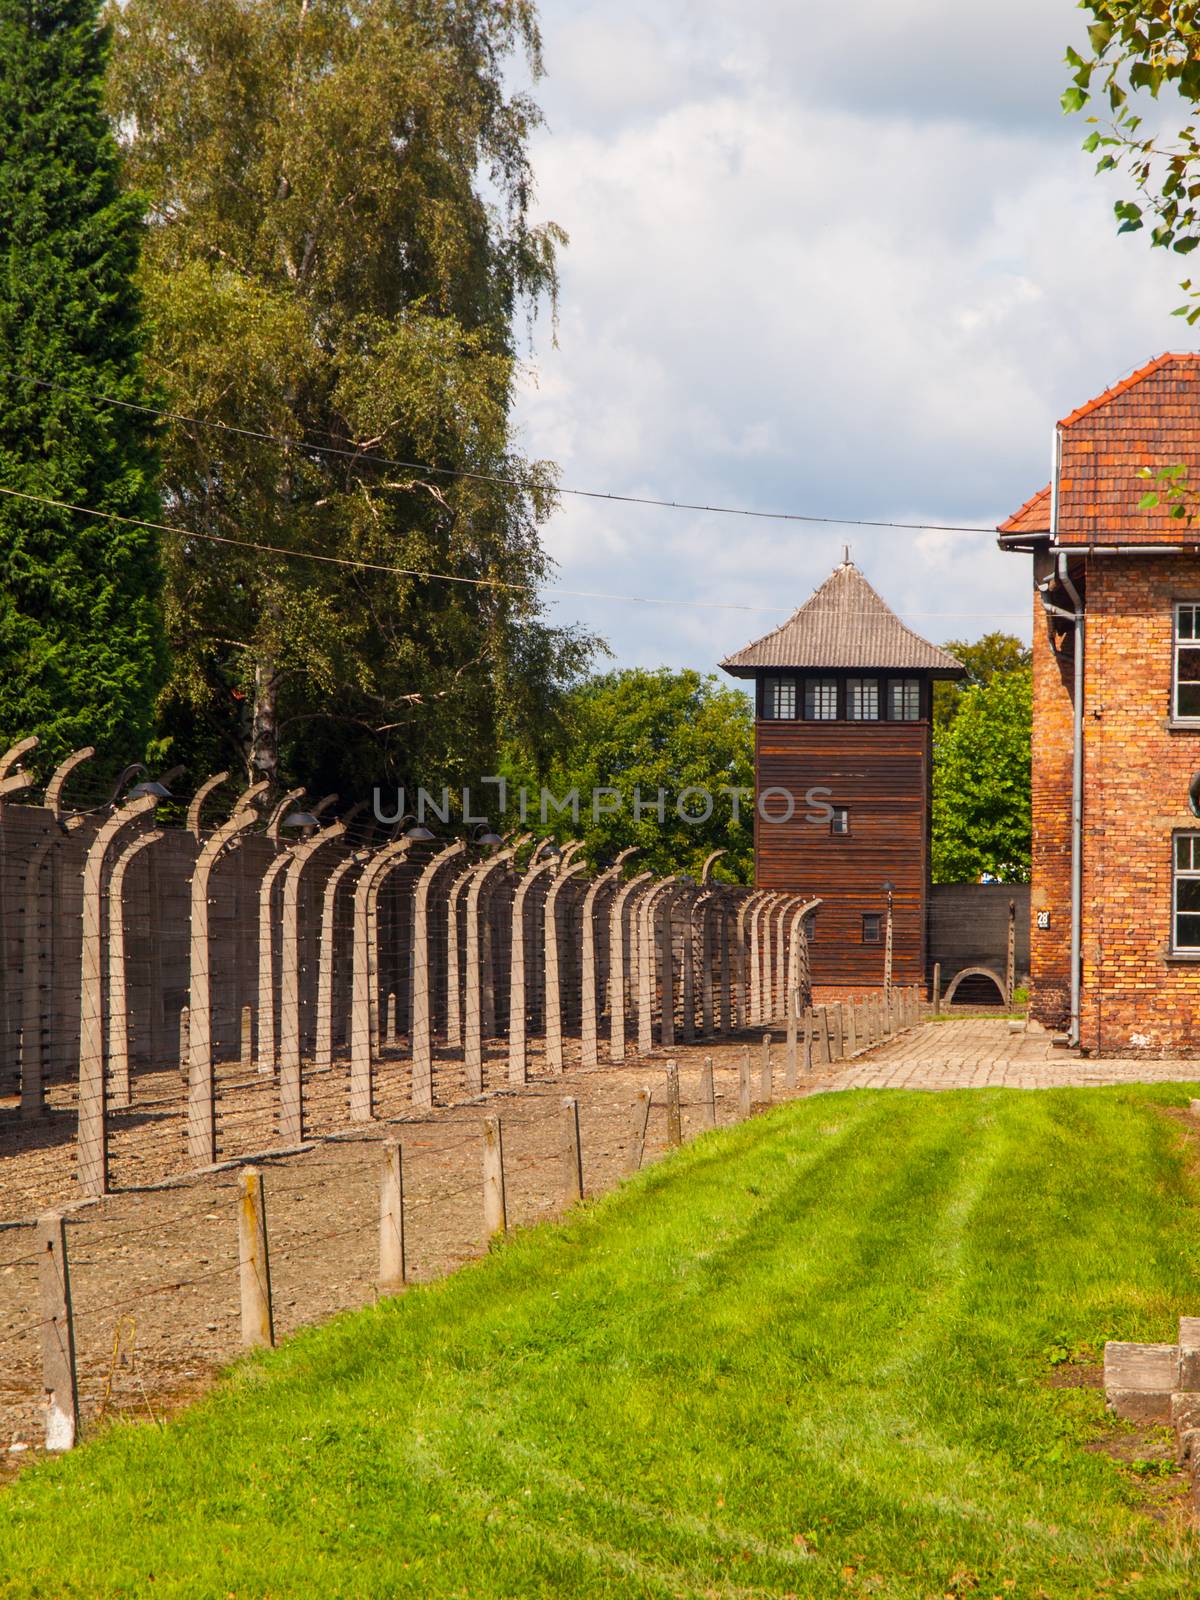 Fence and guard tower of concentration camp by pyty